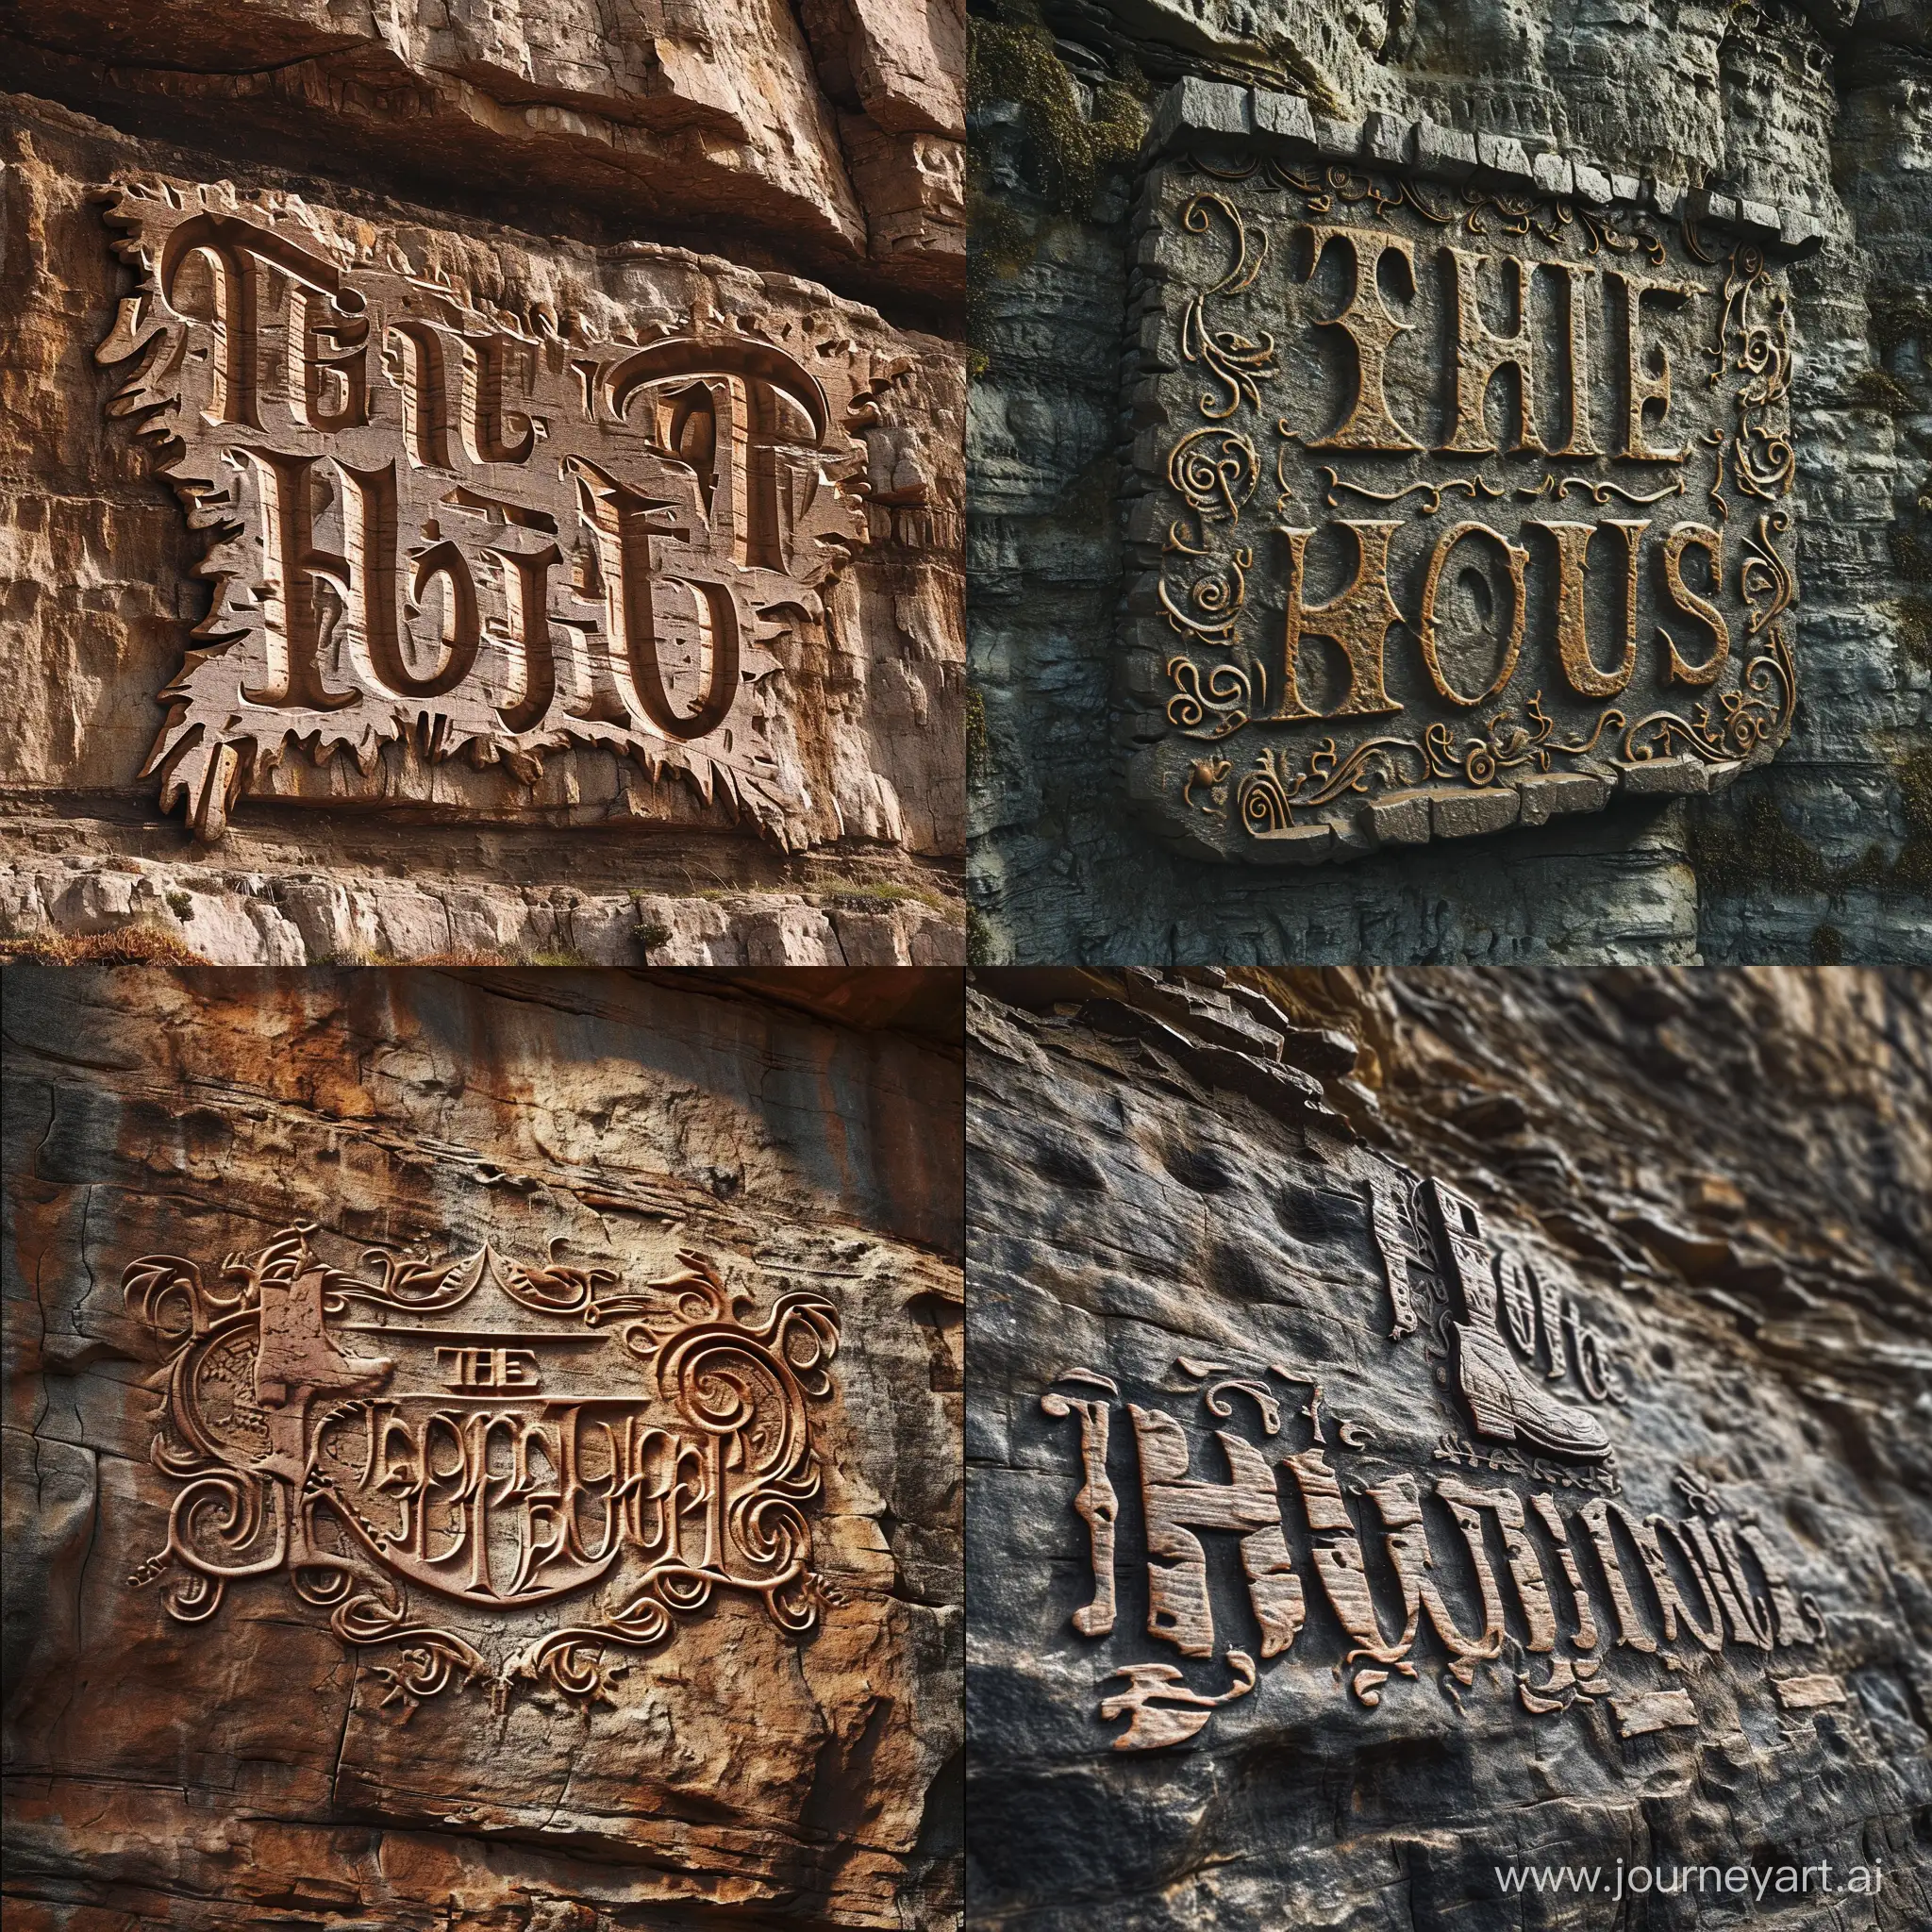 The title "The Boot House" like an intricately designed logo, carved into a rock cliff face naturally.  Epic composition.  Highly detailed. 